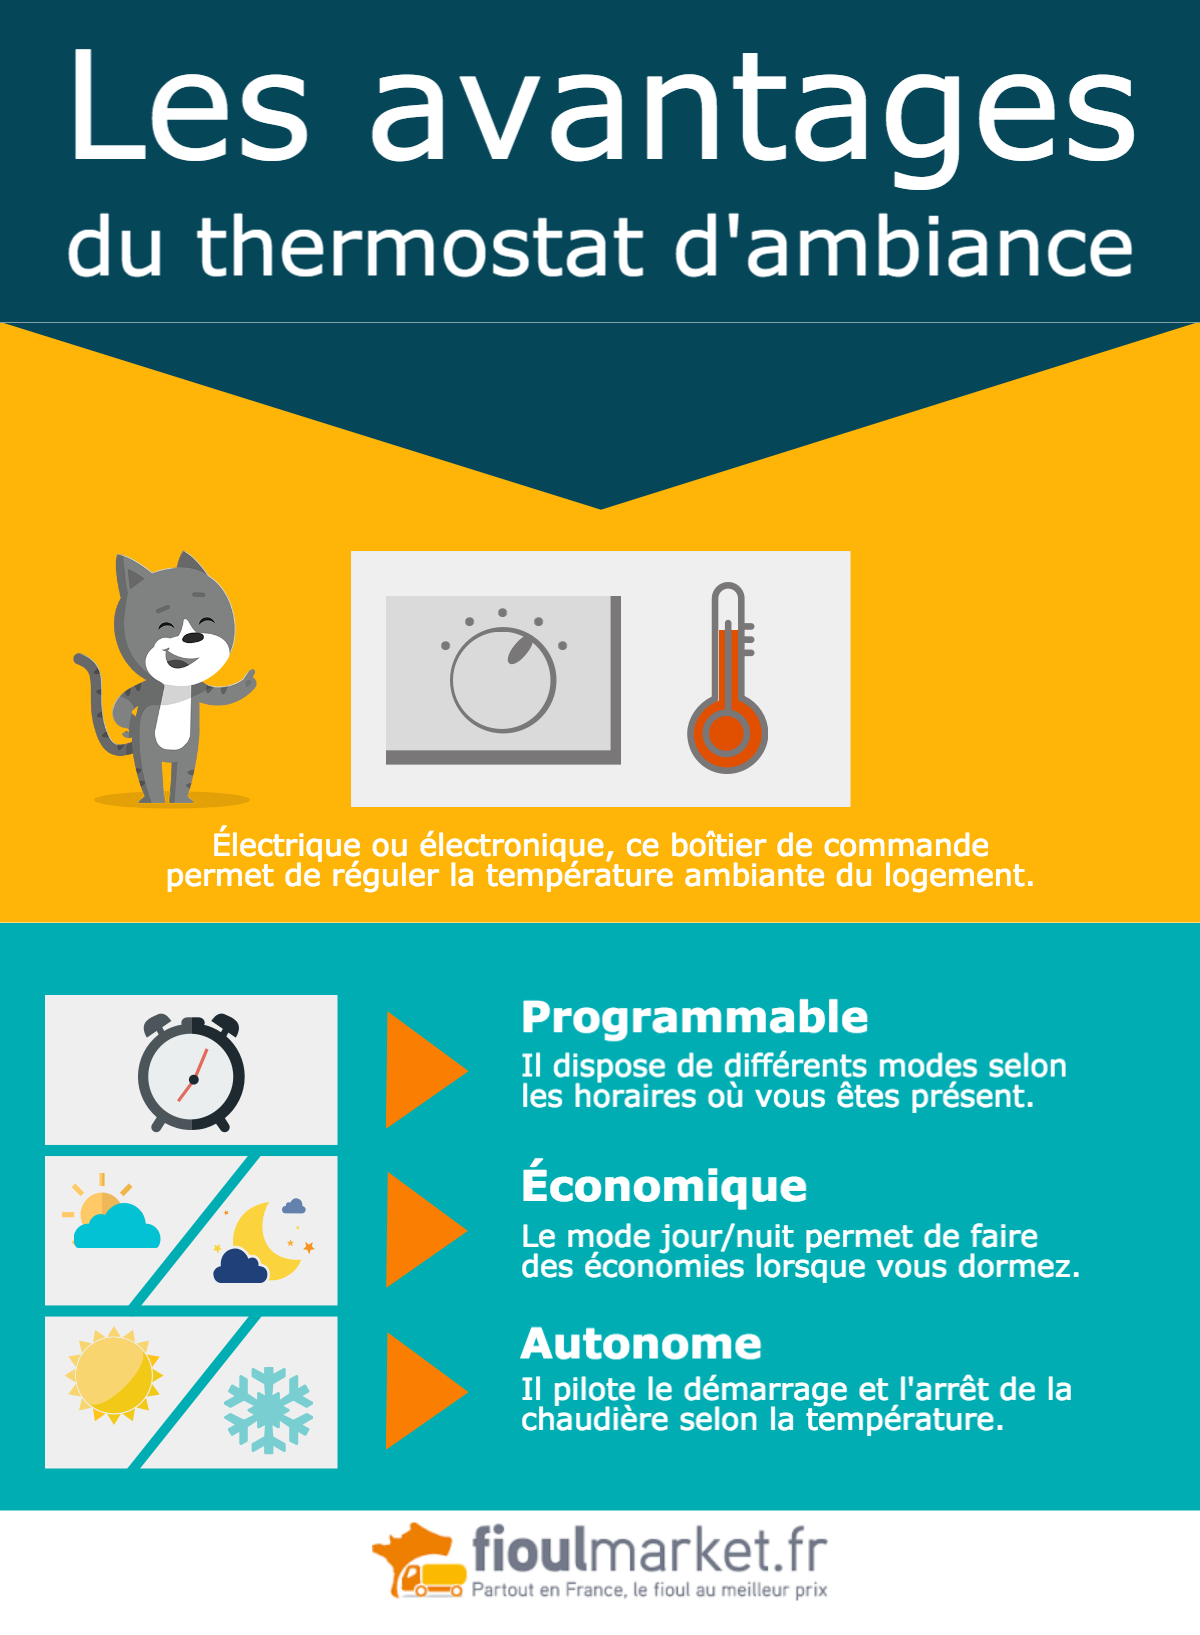 Thermostat d’ambiance ou robinet thermostatique